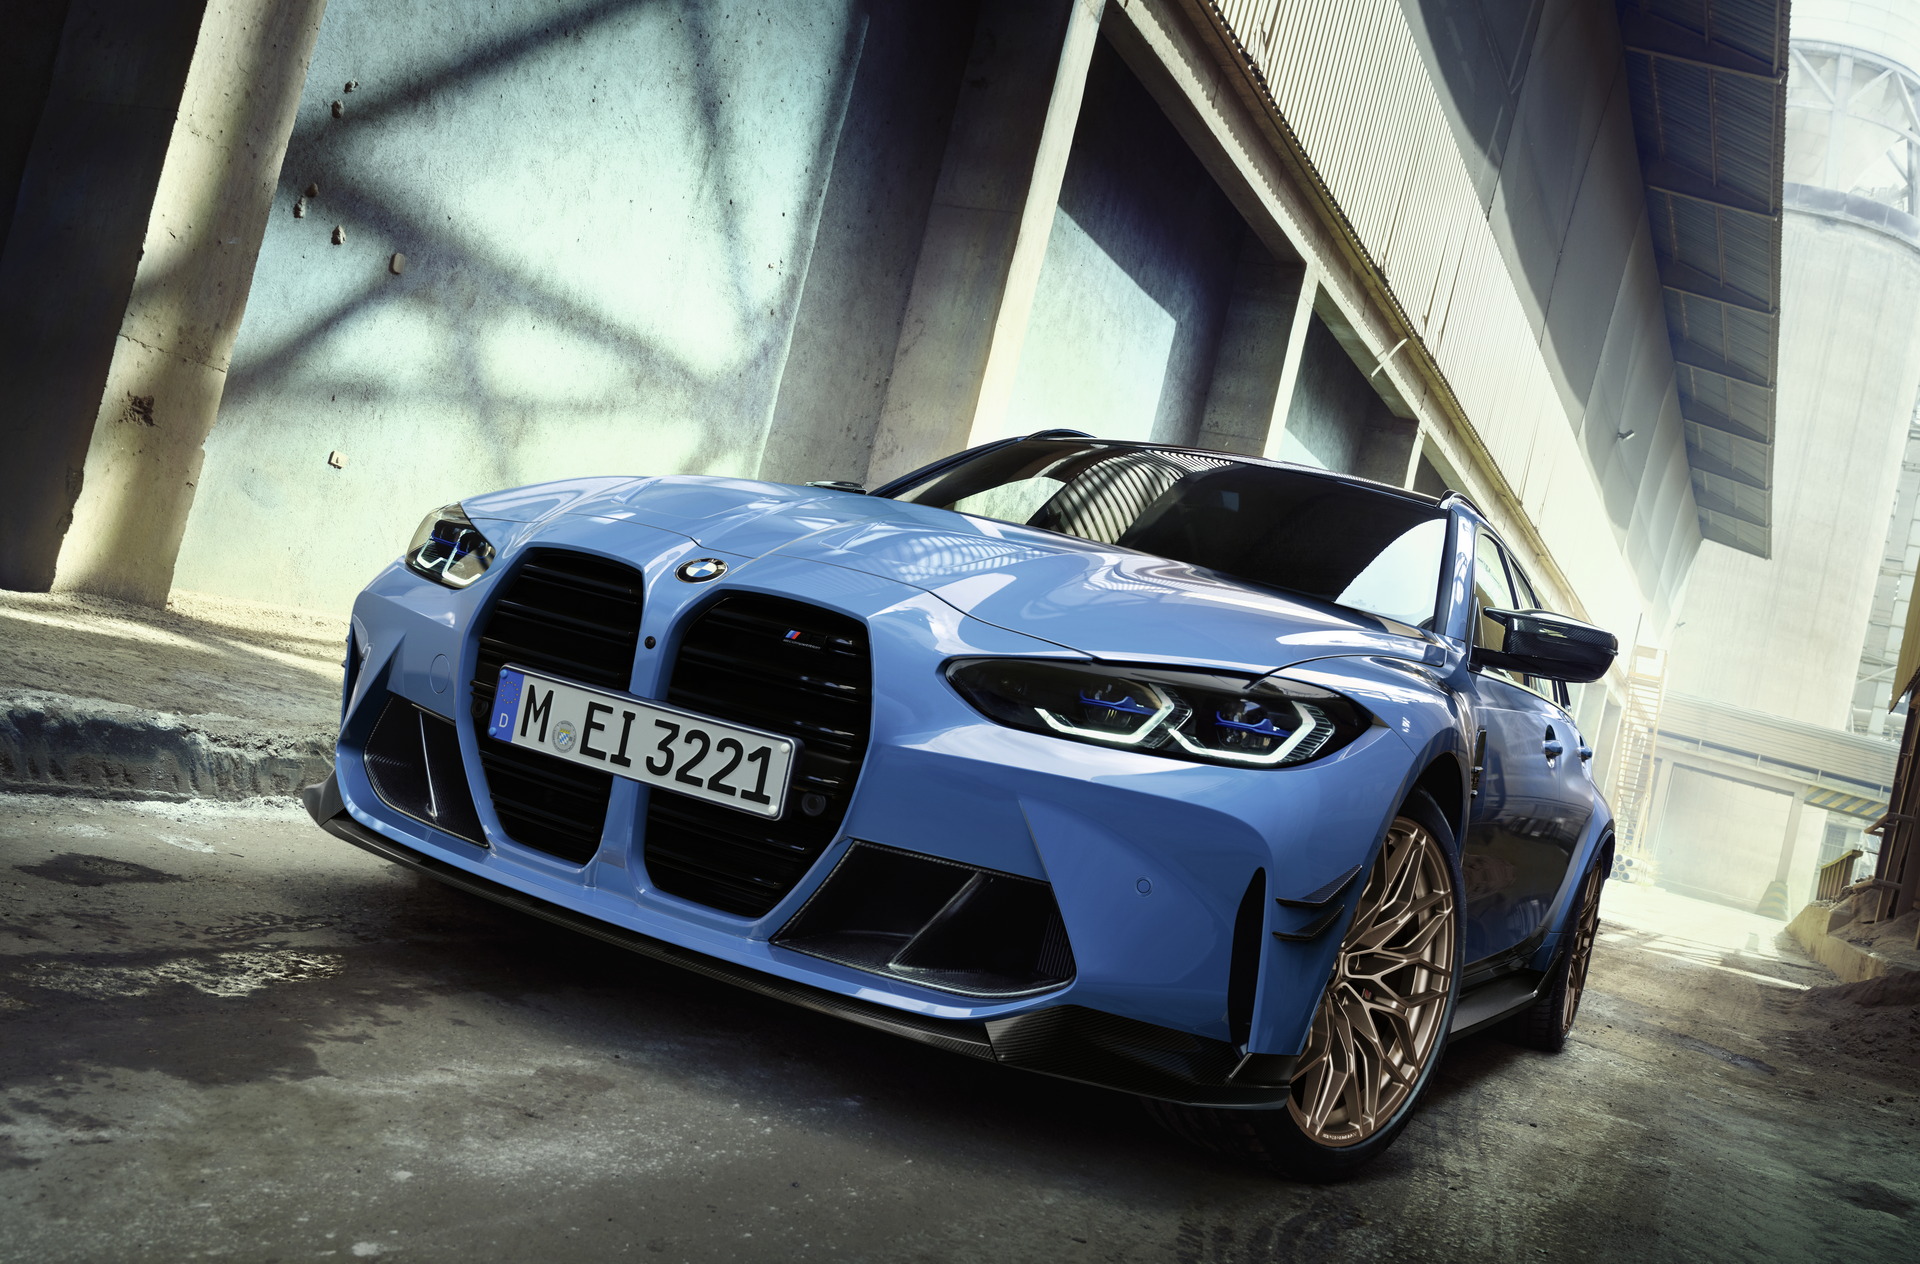 BMW M3 CS Touring Coming In 2025 With 543 HP: Report